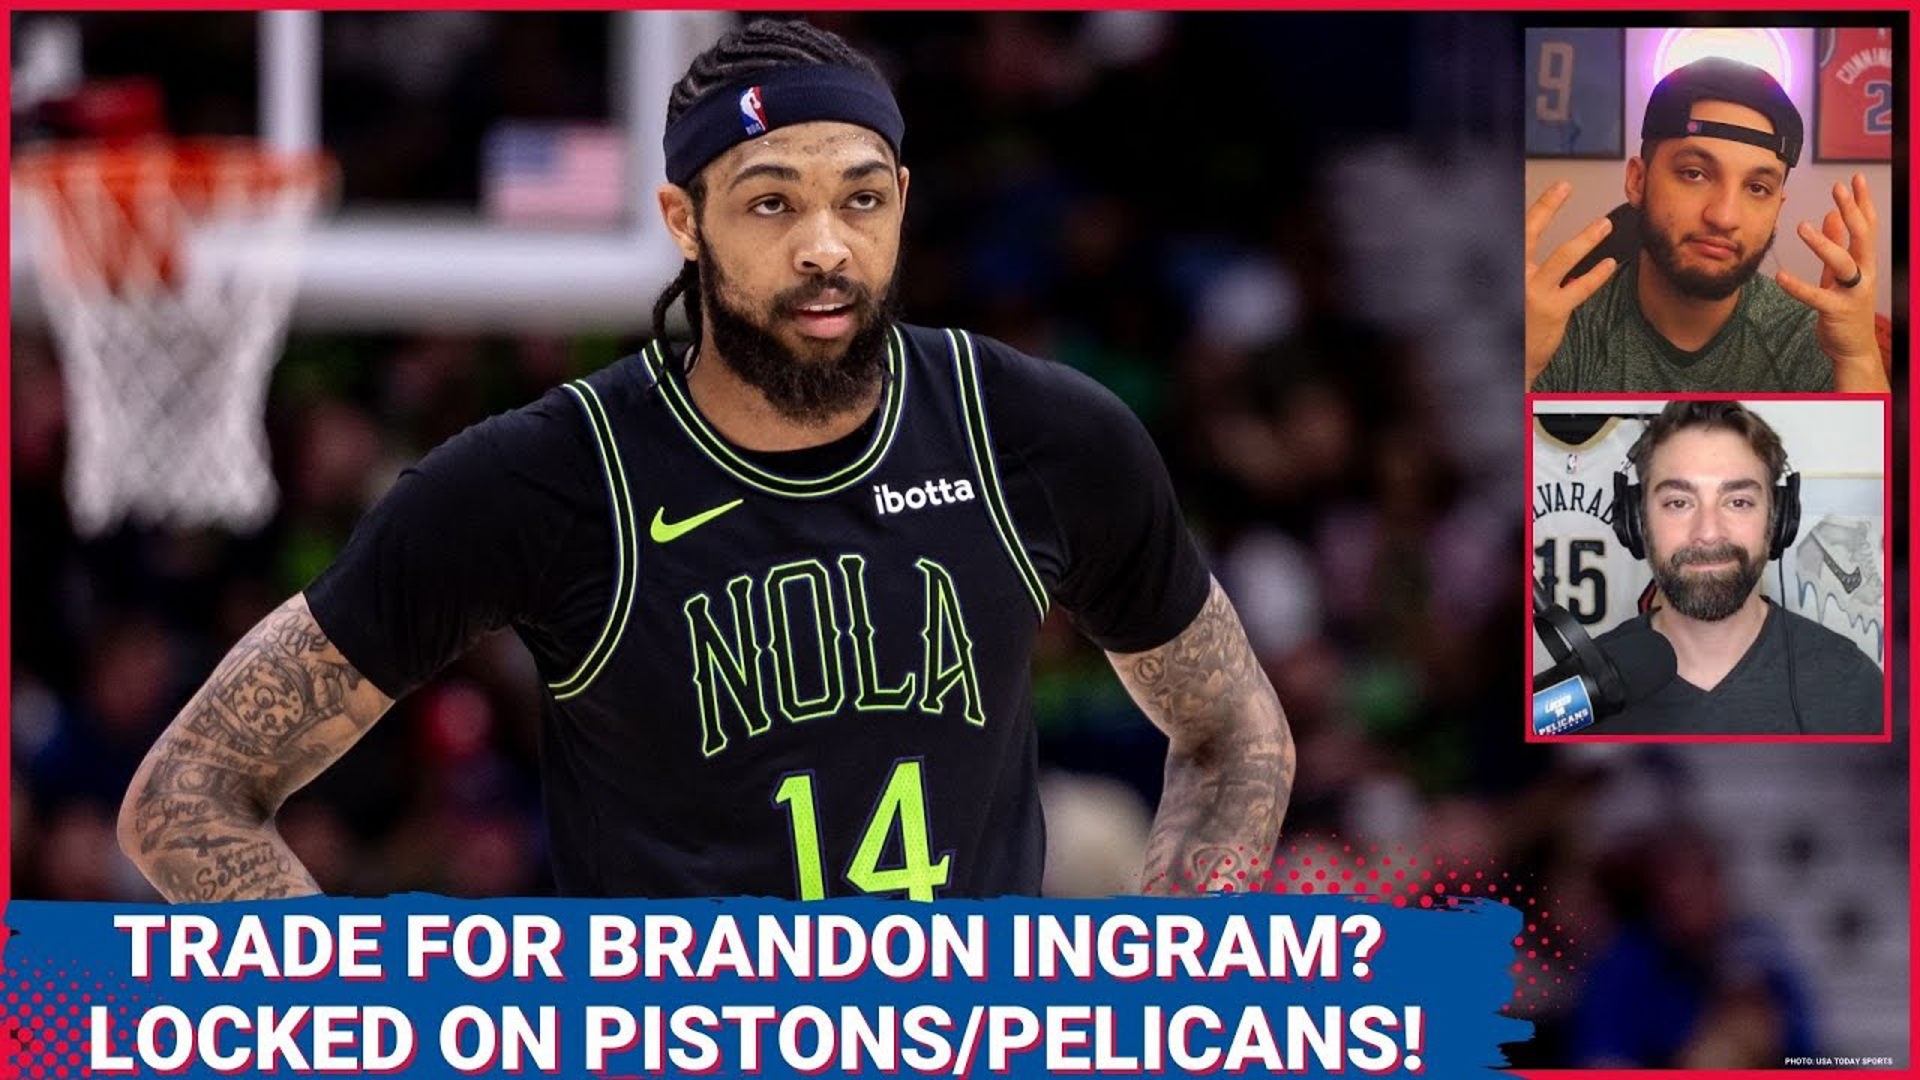 After a disappointing end in the NBA Playoffs, it sounds like All-Star forward Brandon Ingram will be available via trade from the New Orleans Pelicans.